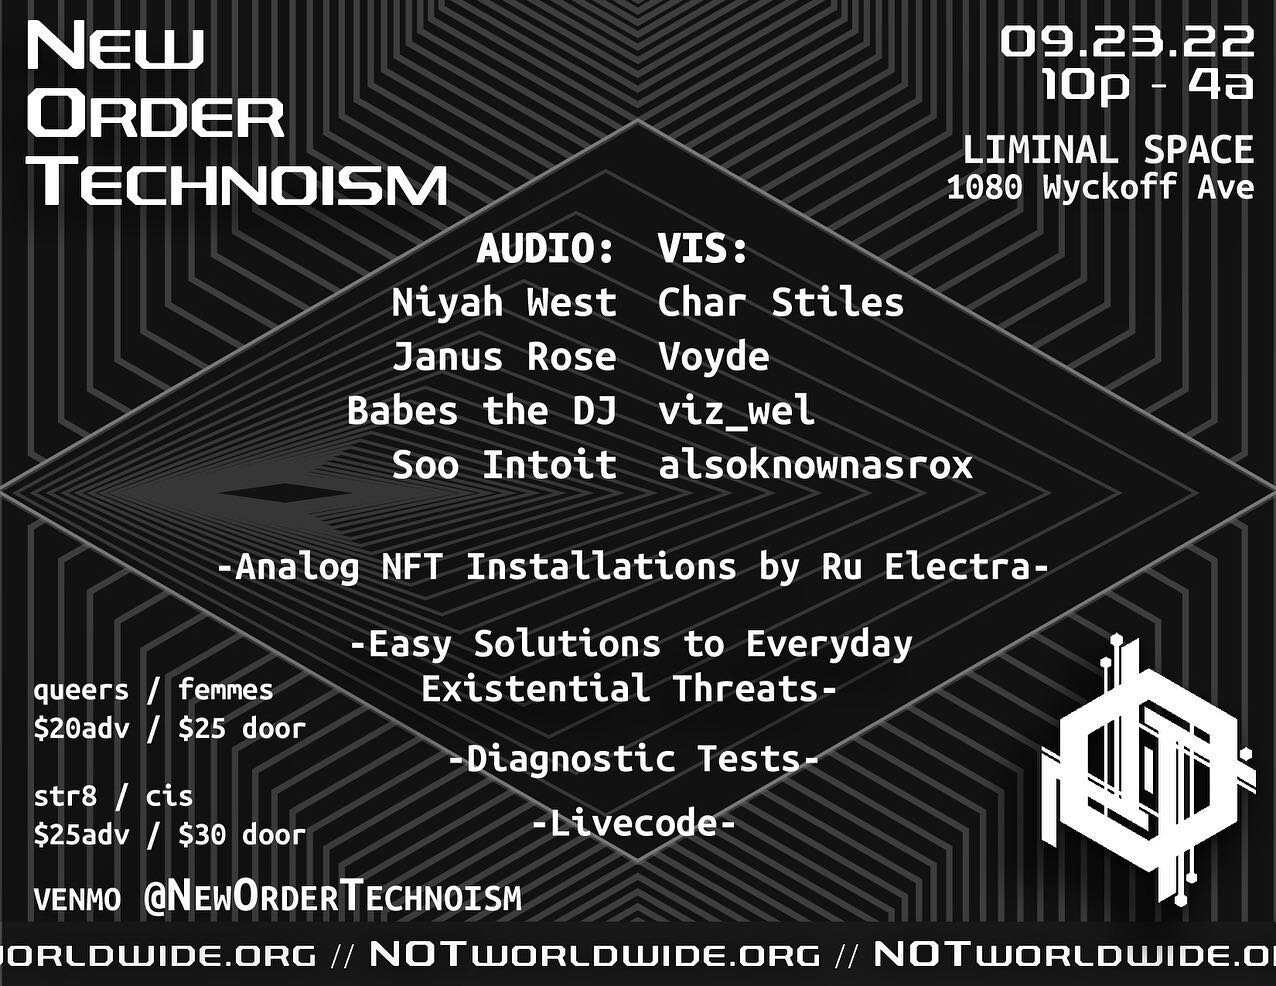 Cultivate a Culture of Internal Enlightenment 
Compromise for a Better VOID
⚙️HAIL DOOM⚙️

10pm - 4am 
21+

venmo @newordertechnoism for tix
link in bio